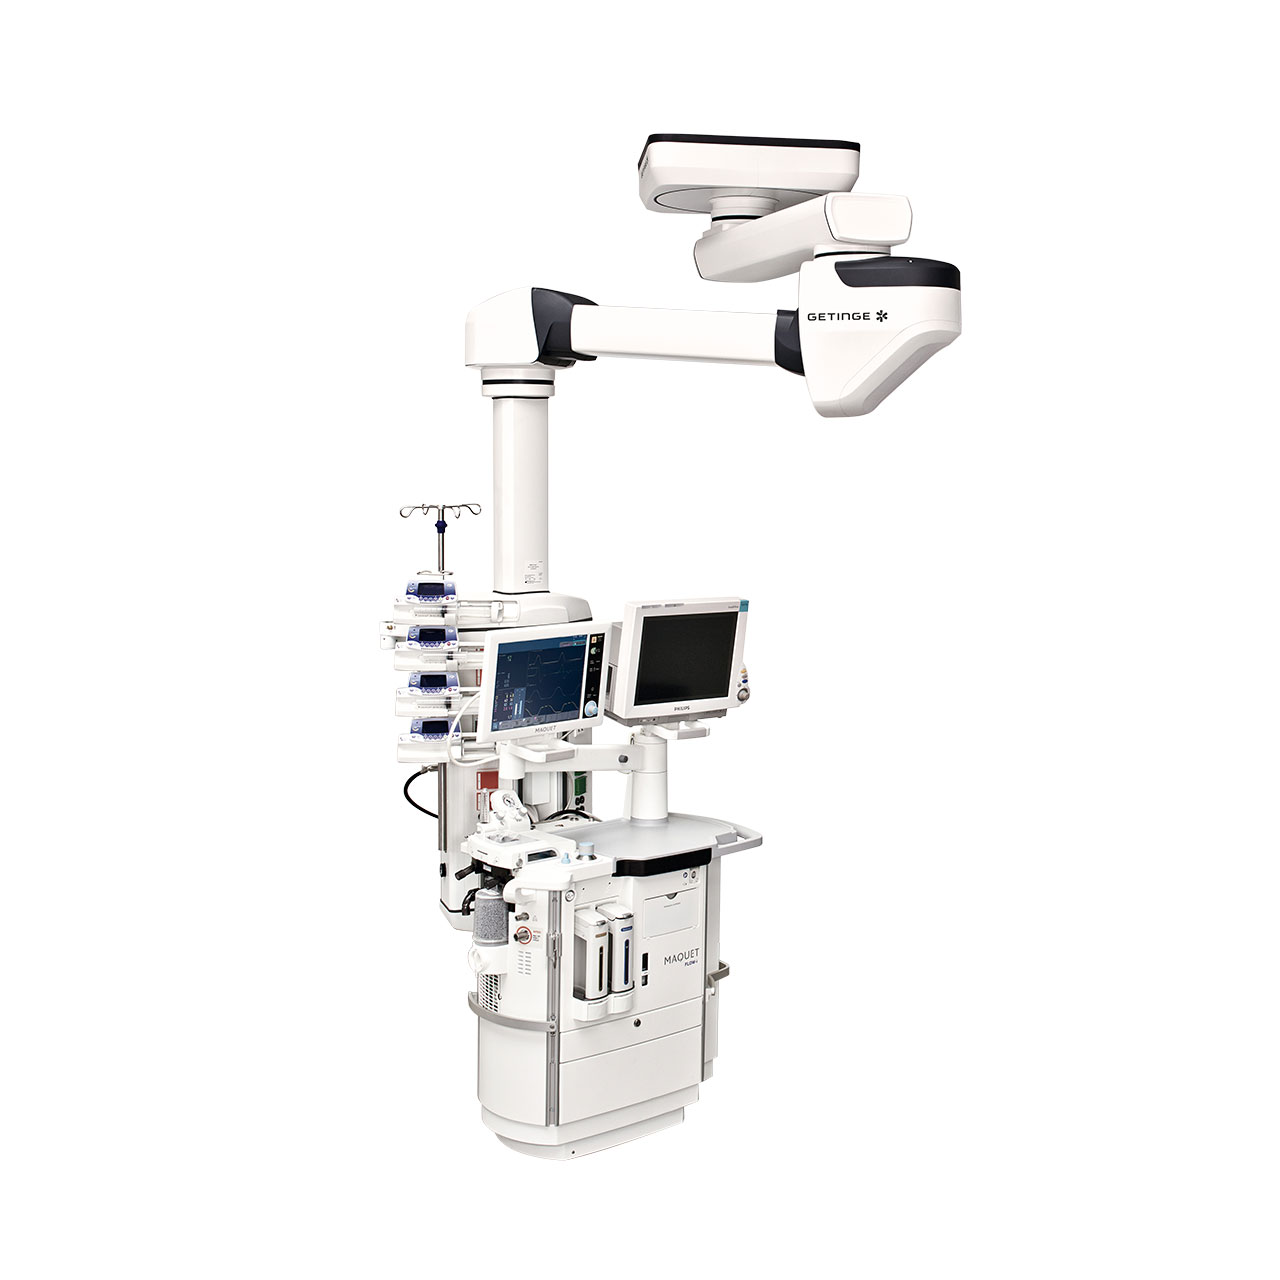 Maquet Moduevo motorized arm Energy lifting solution for anesthesia workstations